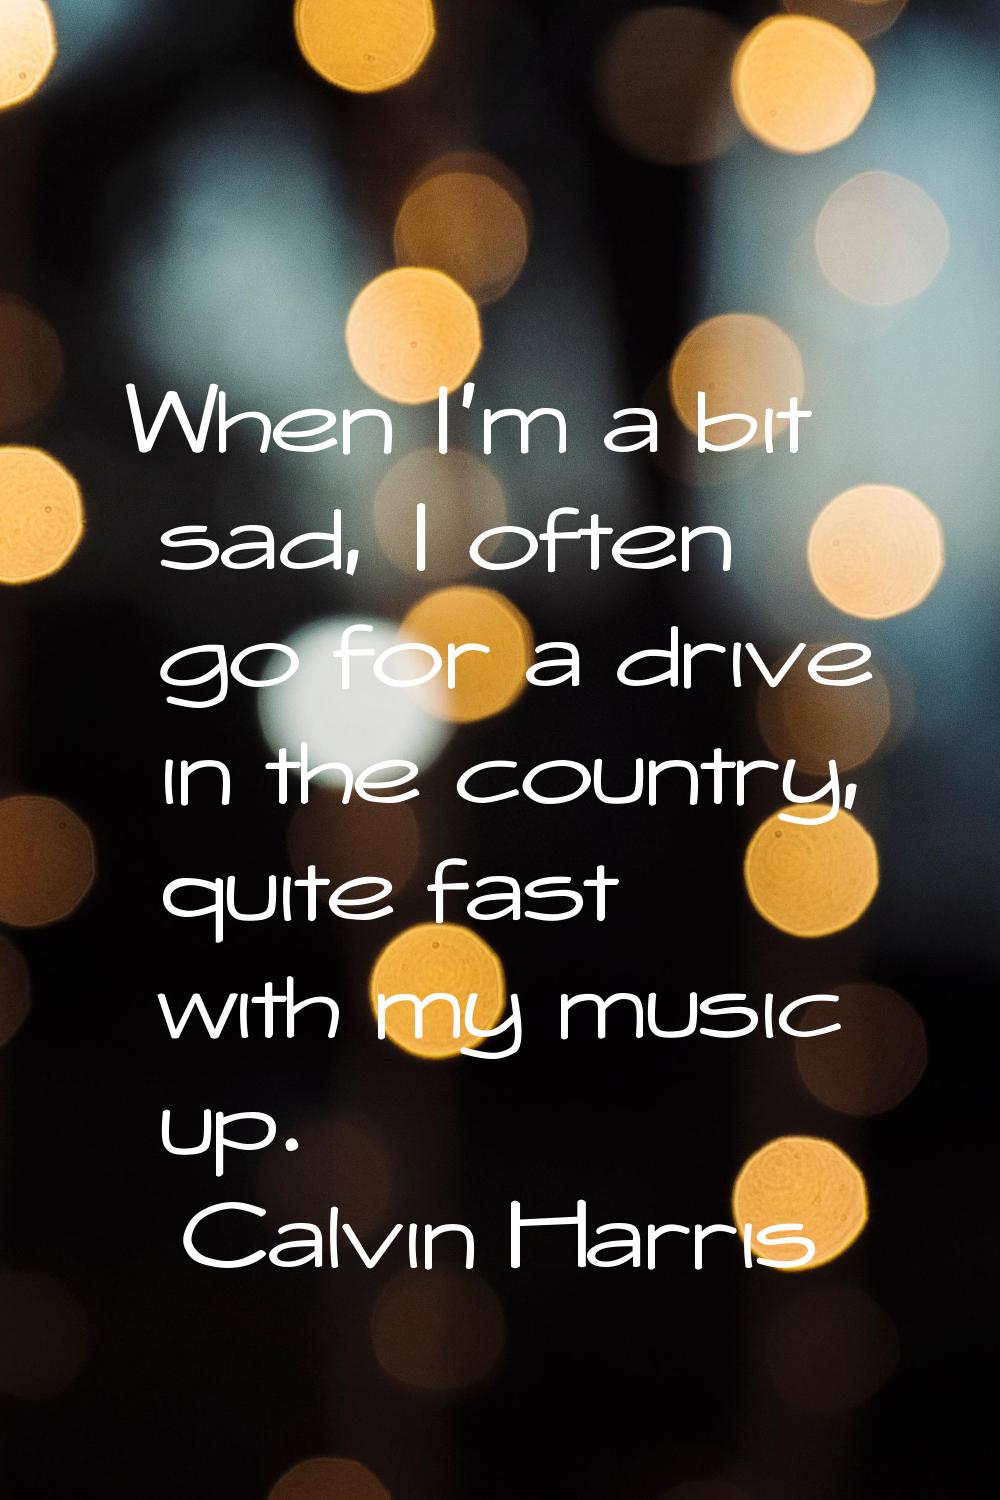 When I'm a bit sad, I often go for a drive in the country, quite fast with my music up.